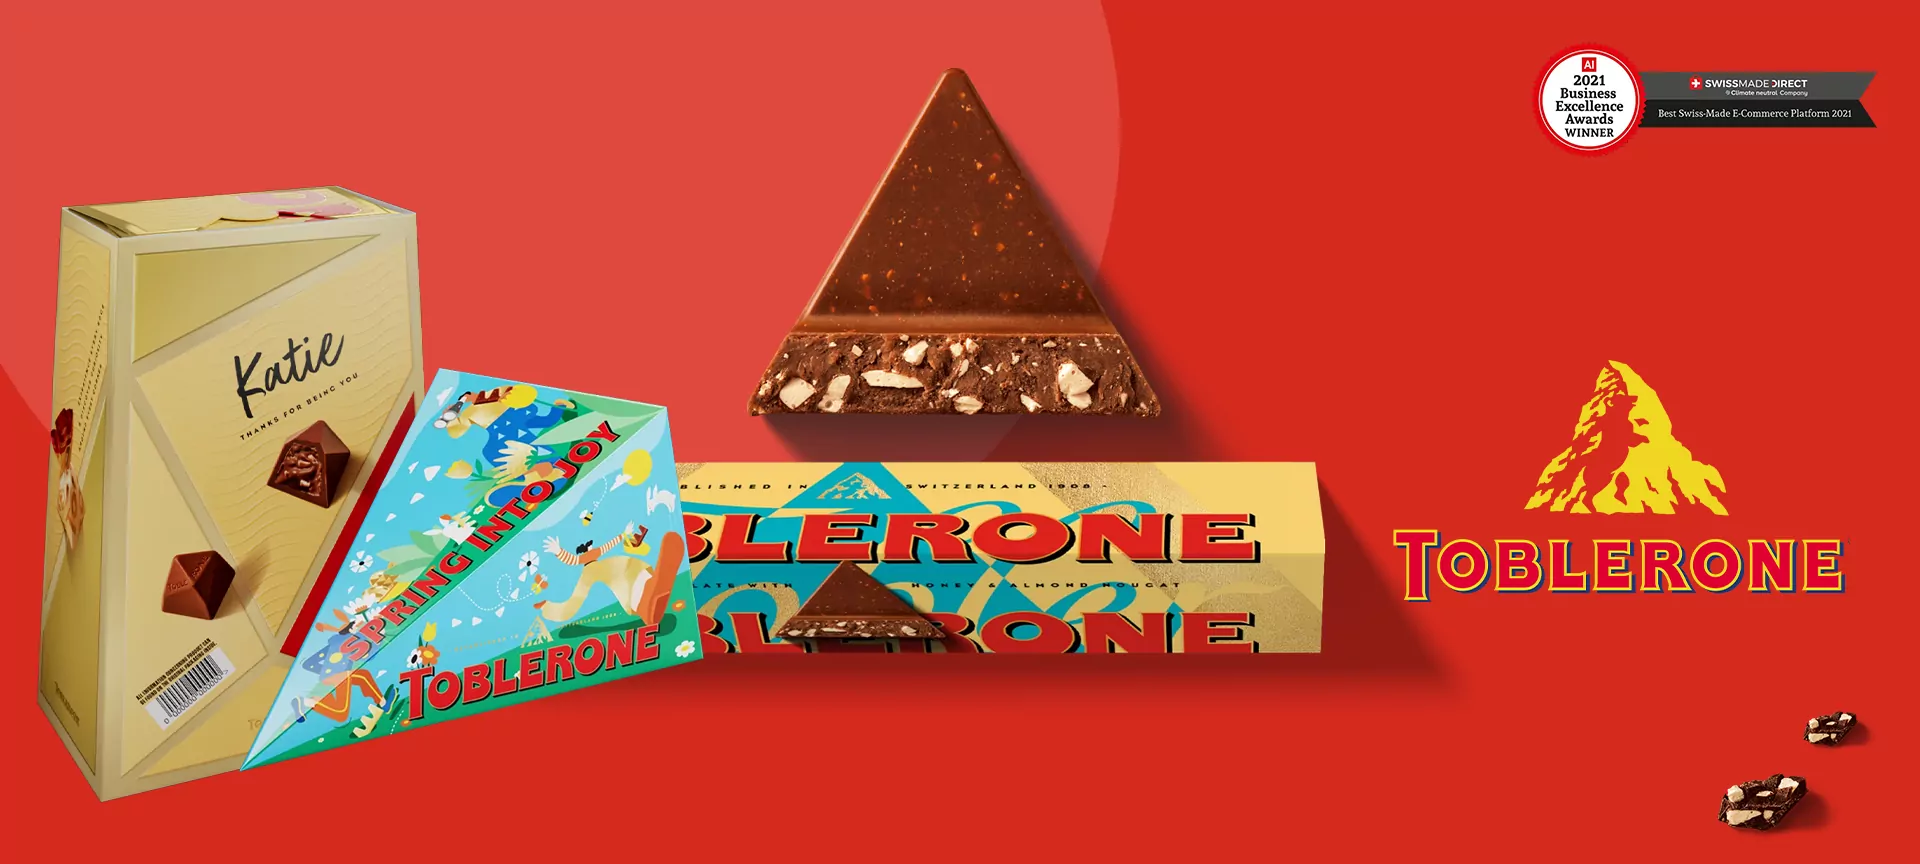 About toblerone